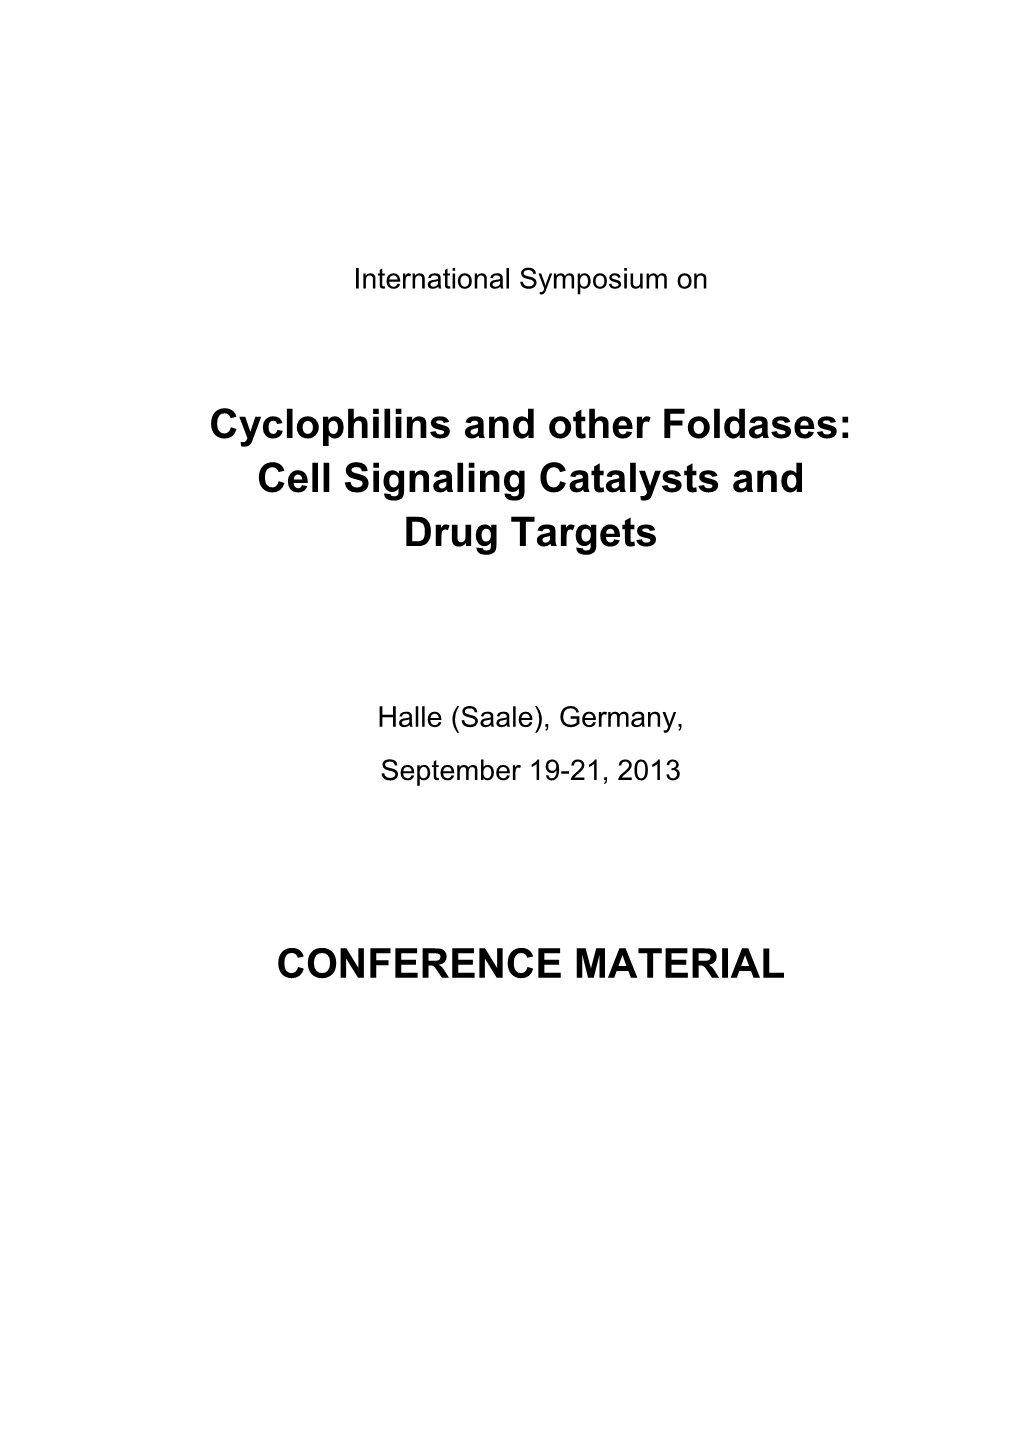 Cyclophilins and Other Foldases: Cell Signaling Catalysts and Drug Targets